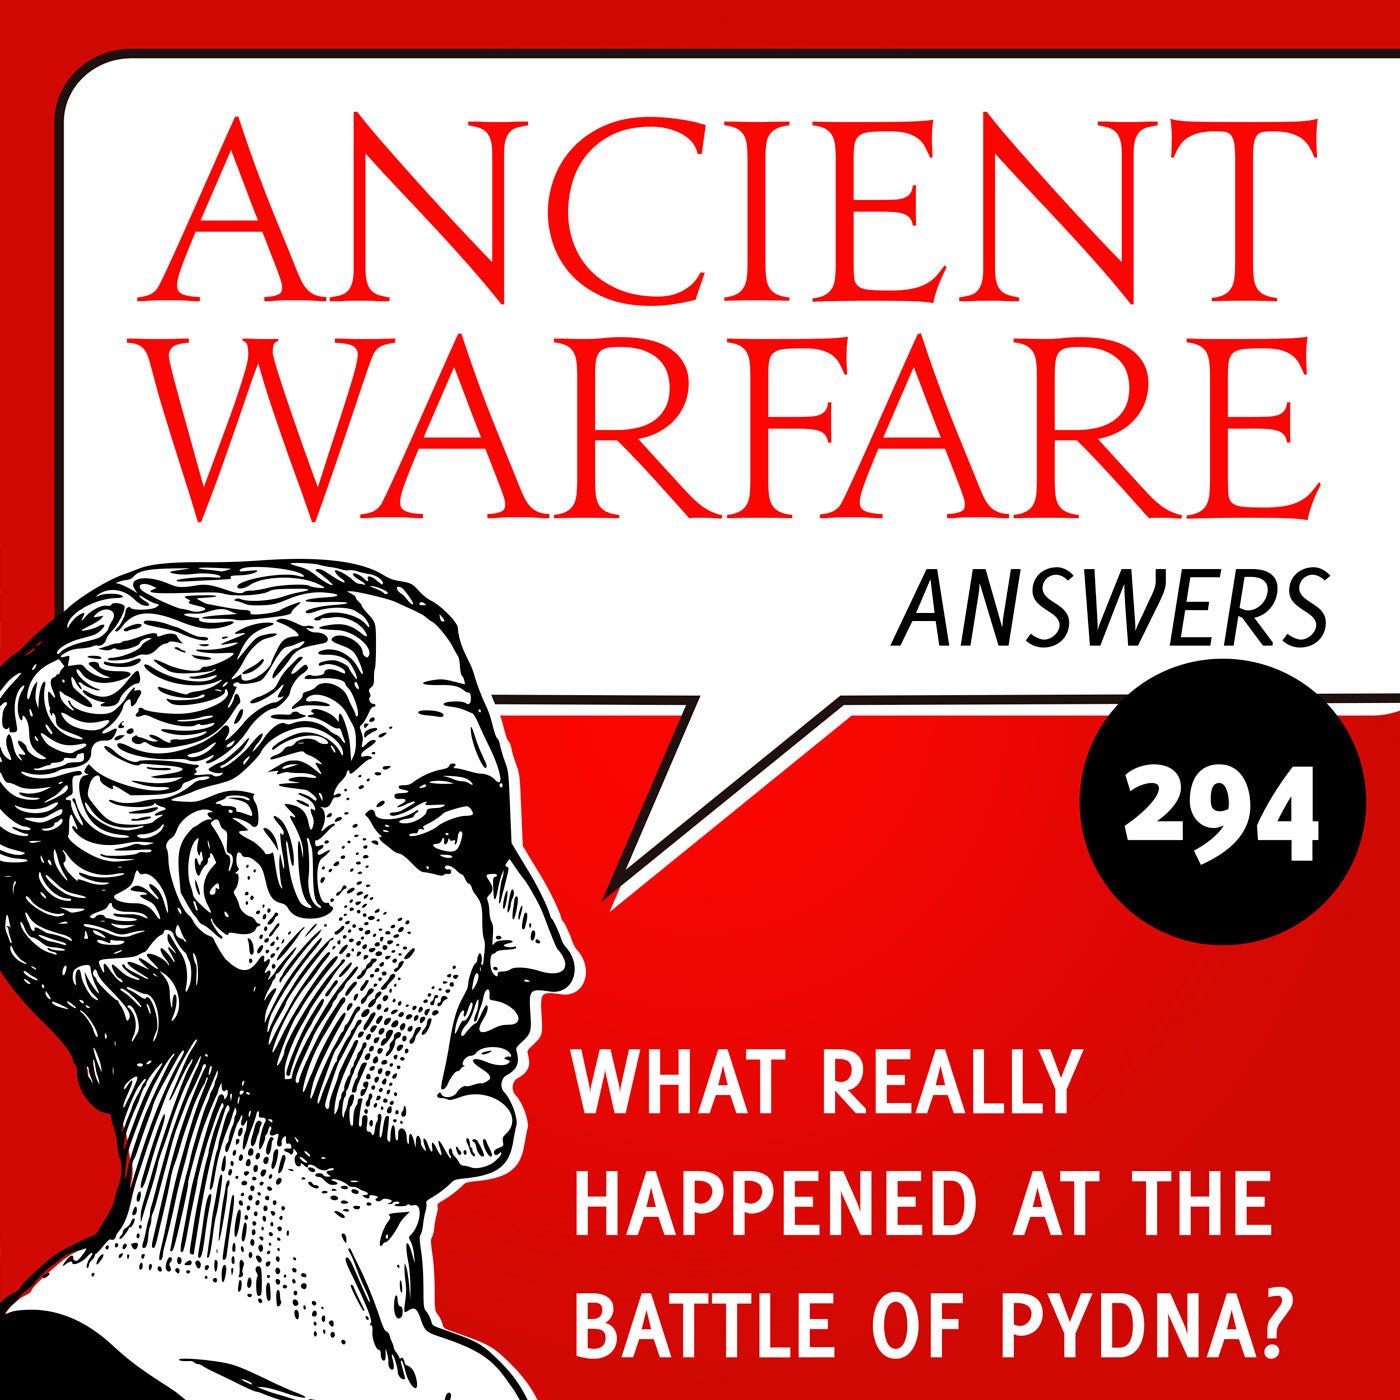 Ancient Warfare Answers (294): What really happened at the battle of Pydna?